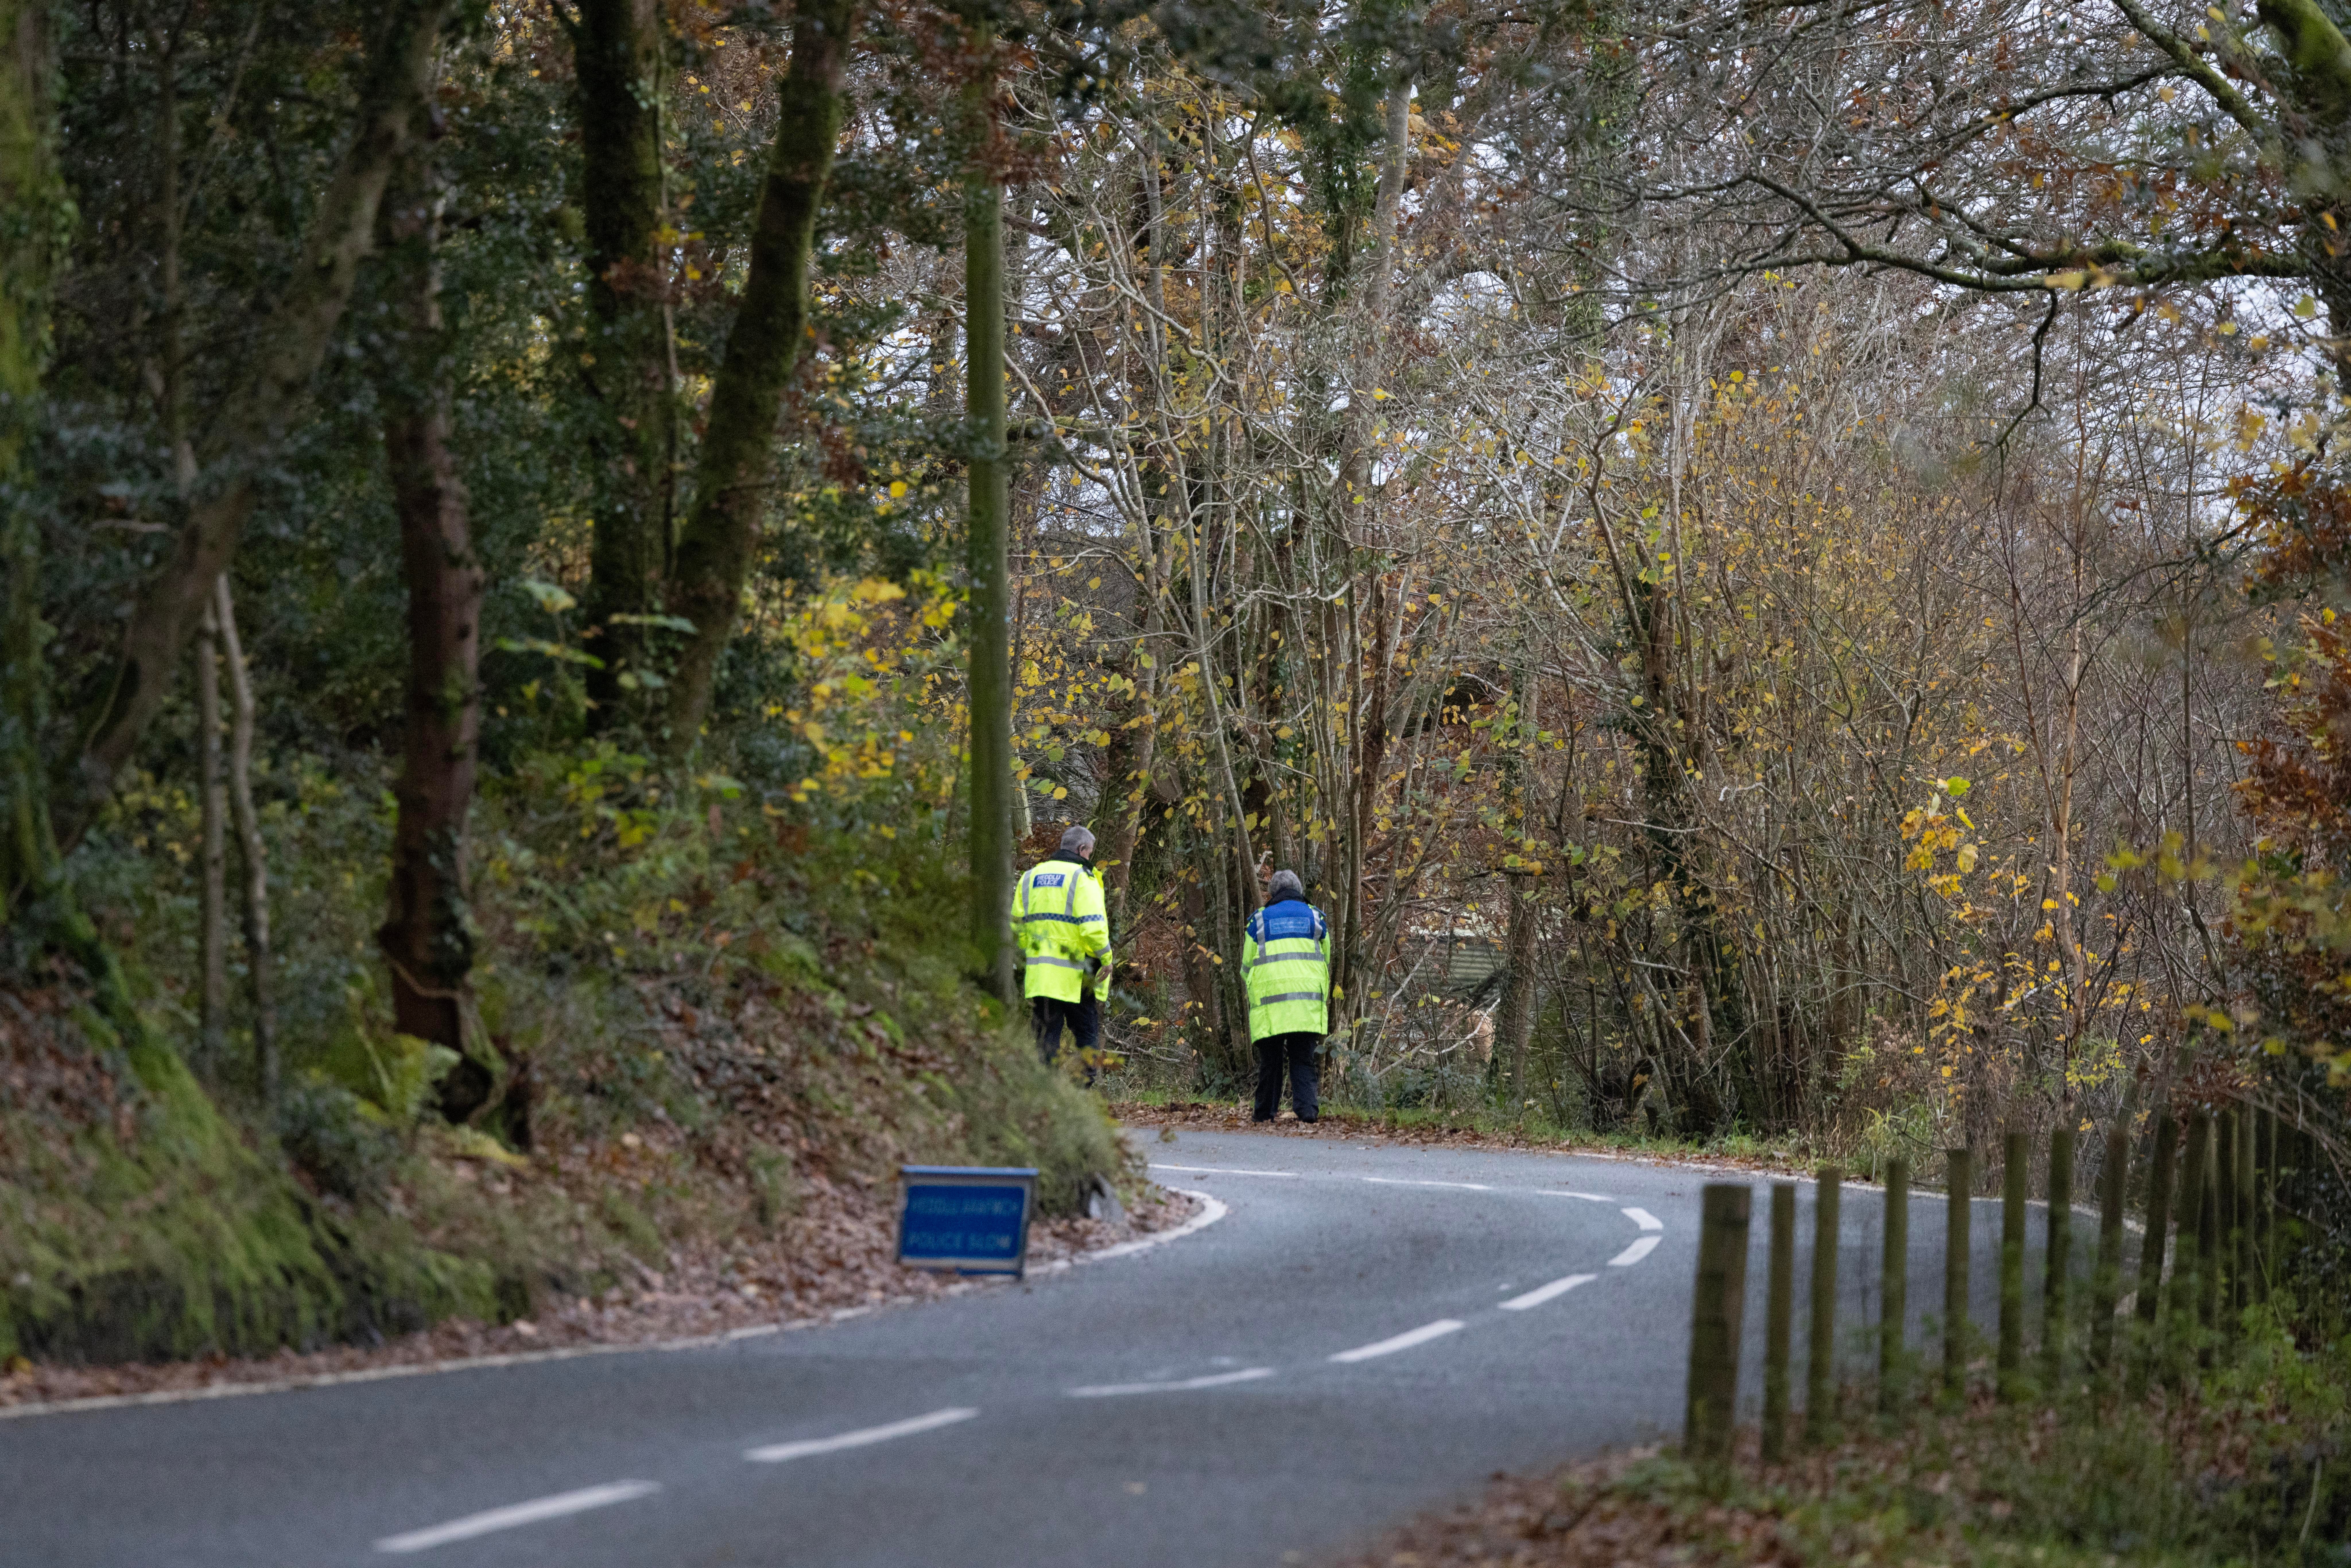 Police officers at the scene where the four teenagers were found